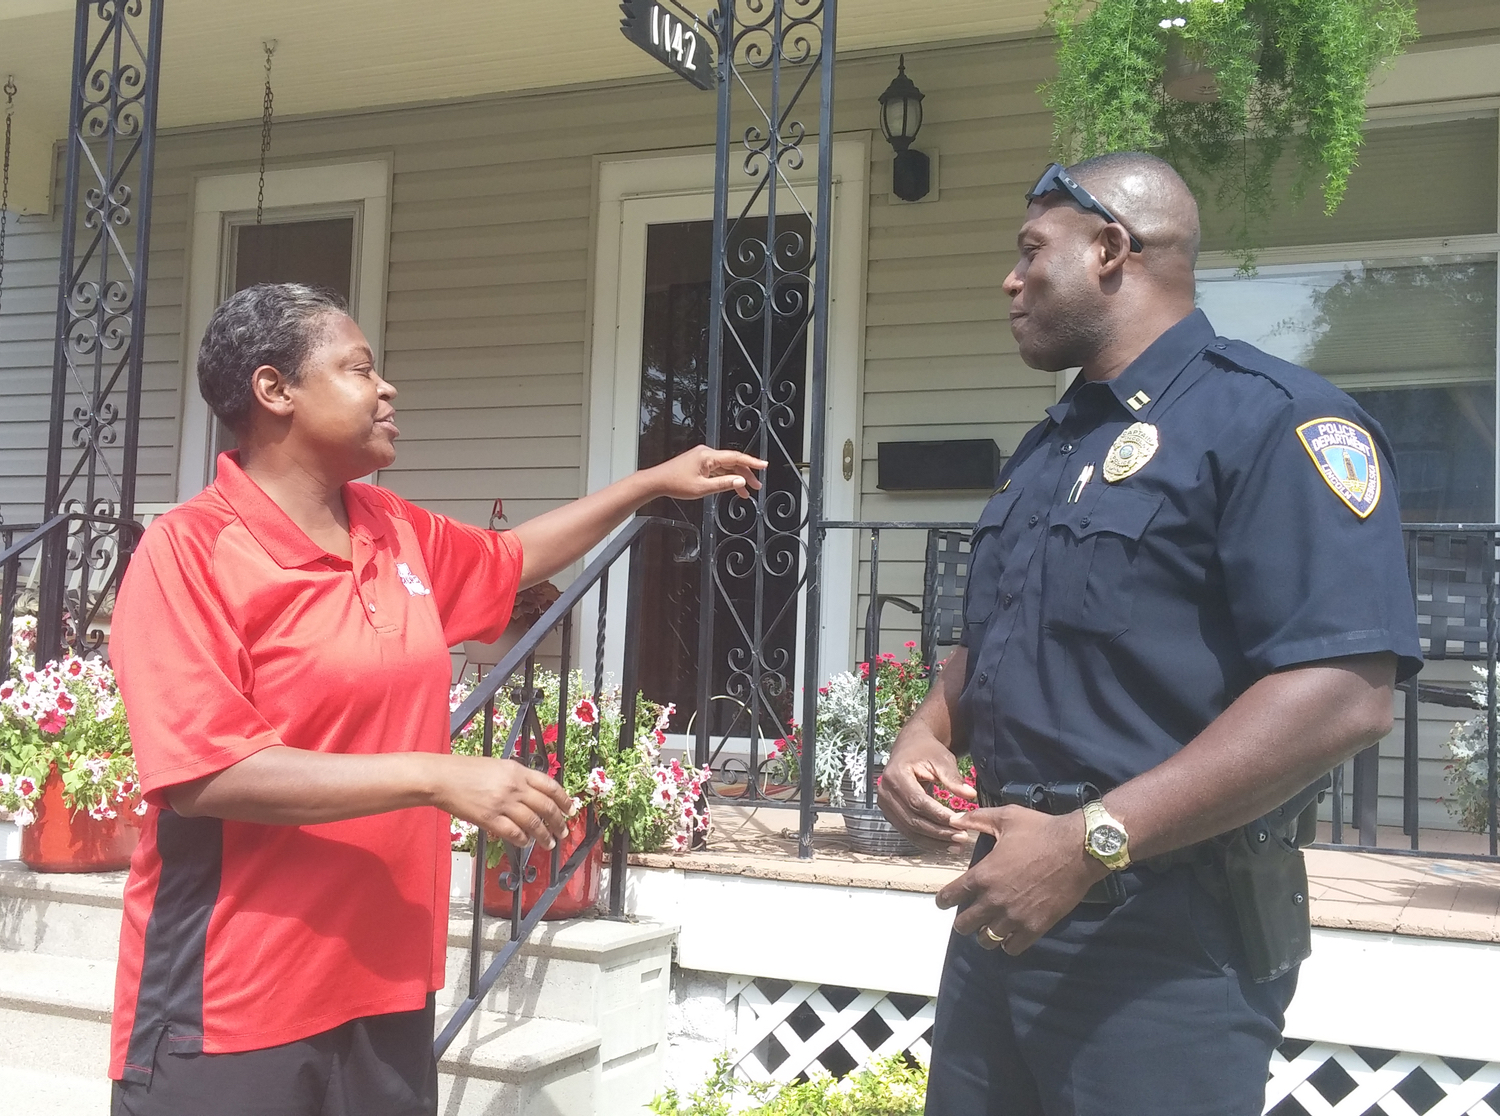 Annette McRoy talks with Capt. Anthony Butler in the North Bottoms neighborhood that she shares with students. More than two-thirds of the homes are student rentals but police have cracked down and limited the number of wild parties. McRoy, a former city council member, bought a house in the neighborhood after the crackdown reduced the number of problem houses. (Bridge photo by Mike Wilkinson)